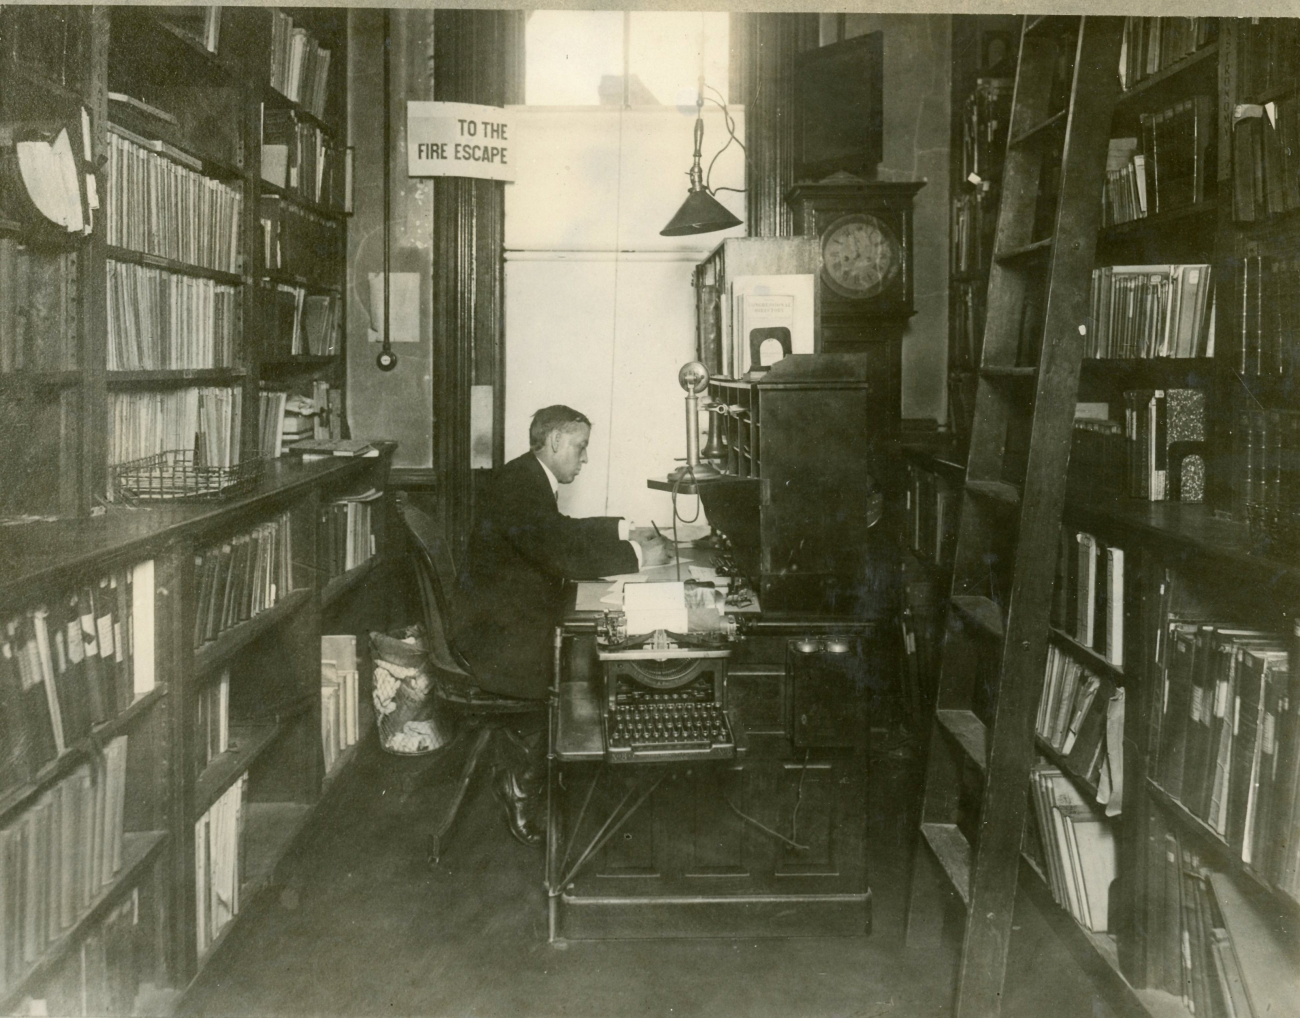 William Masker, Library and Archives Division